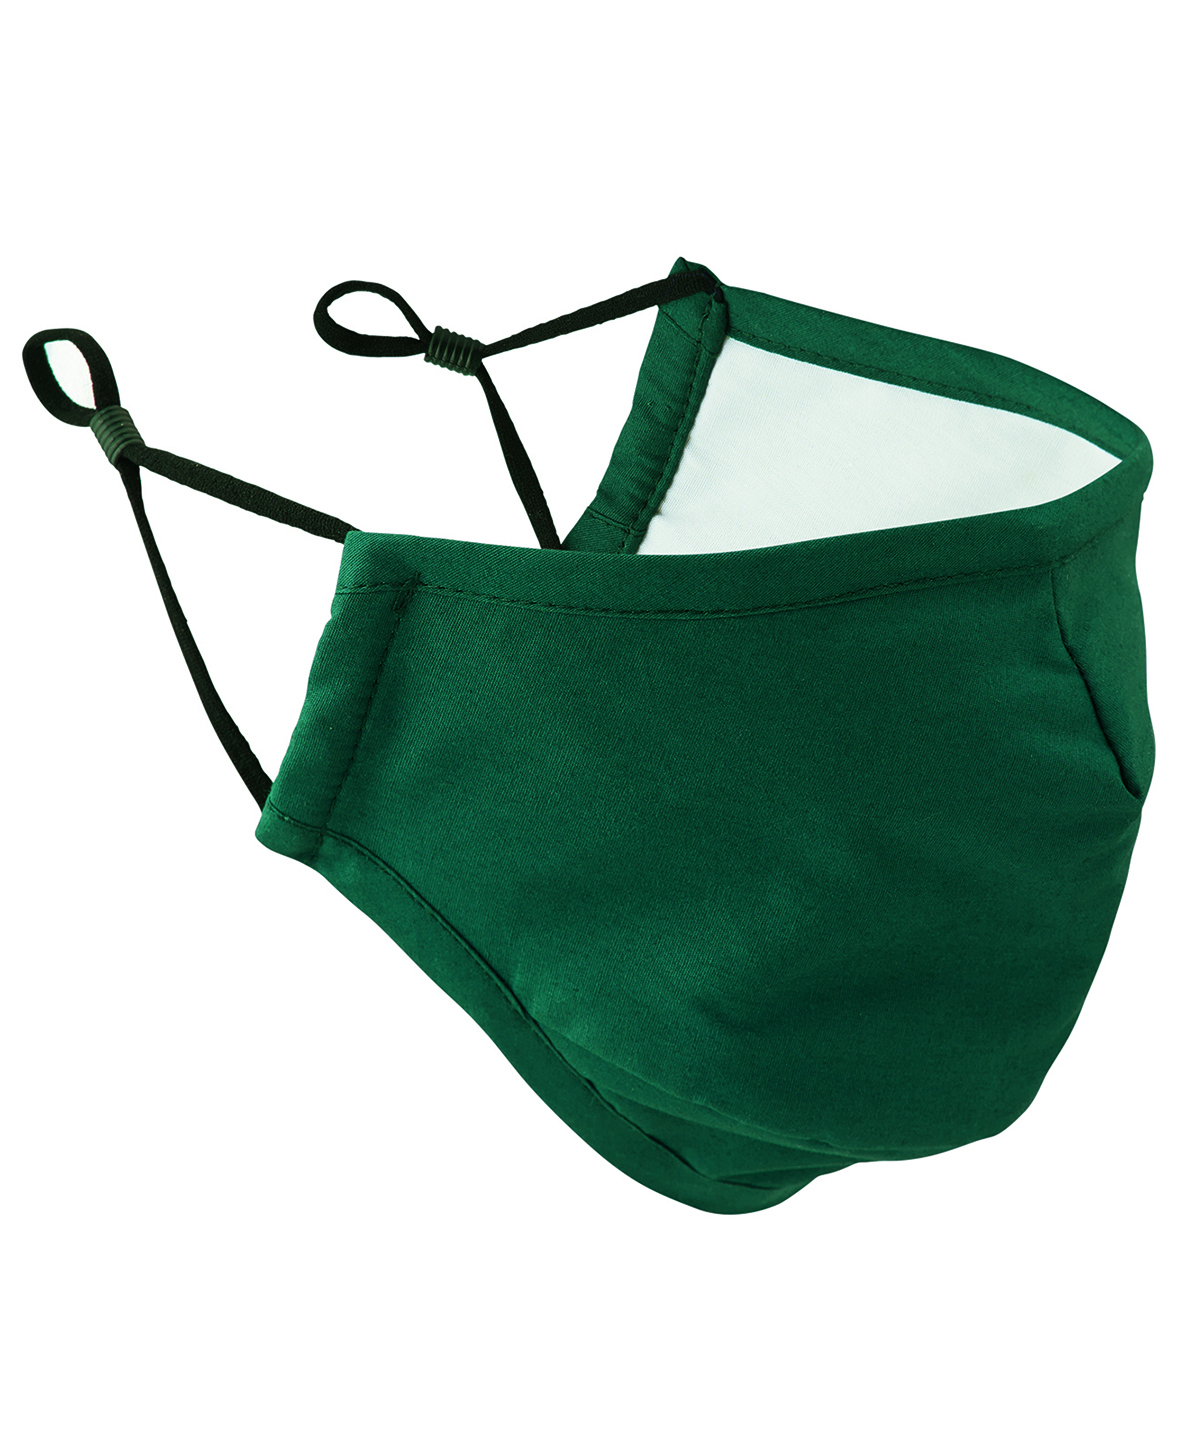 3-Layer Fabric Mask (Afnor Certified) Bottle Green Size One Size